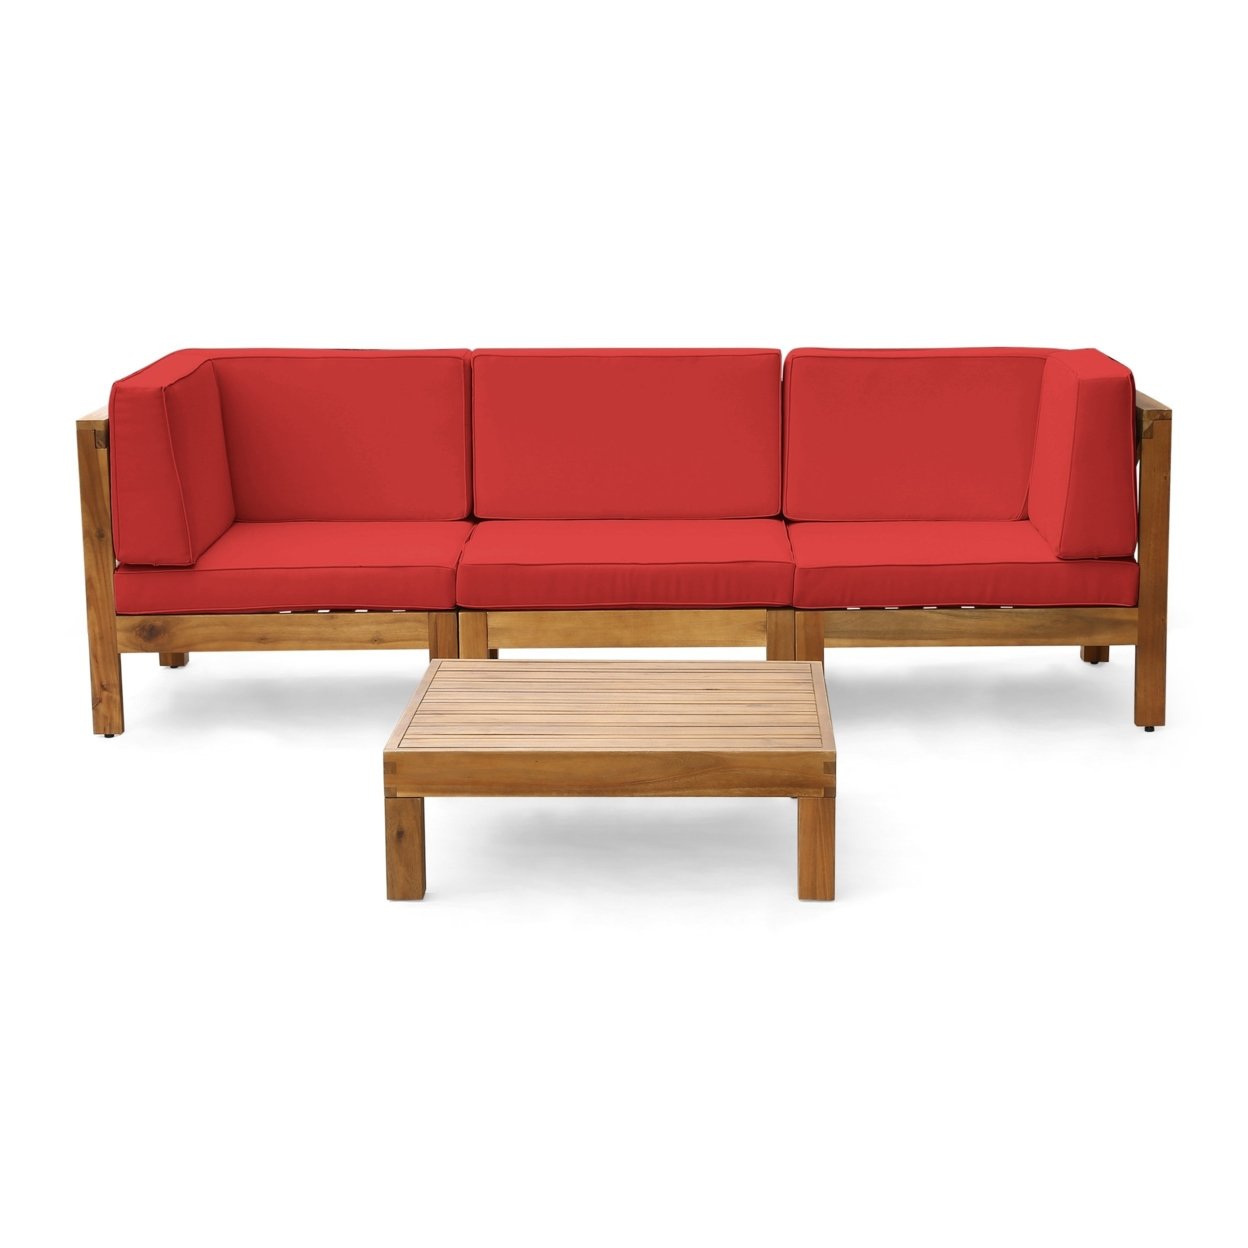 Dawson Outdoor Sectional Sofa Set With Coffee Table - 4-Piece 3-Seater - Acacia Wood - Outdoor Cushions - Red, Teak